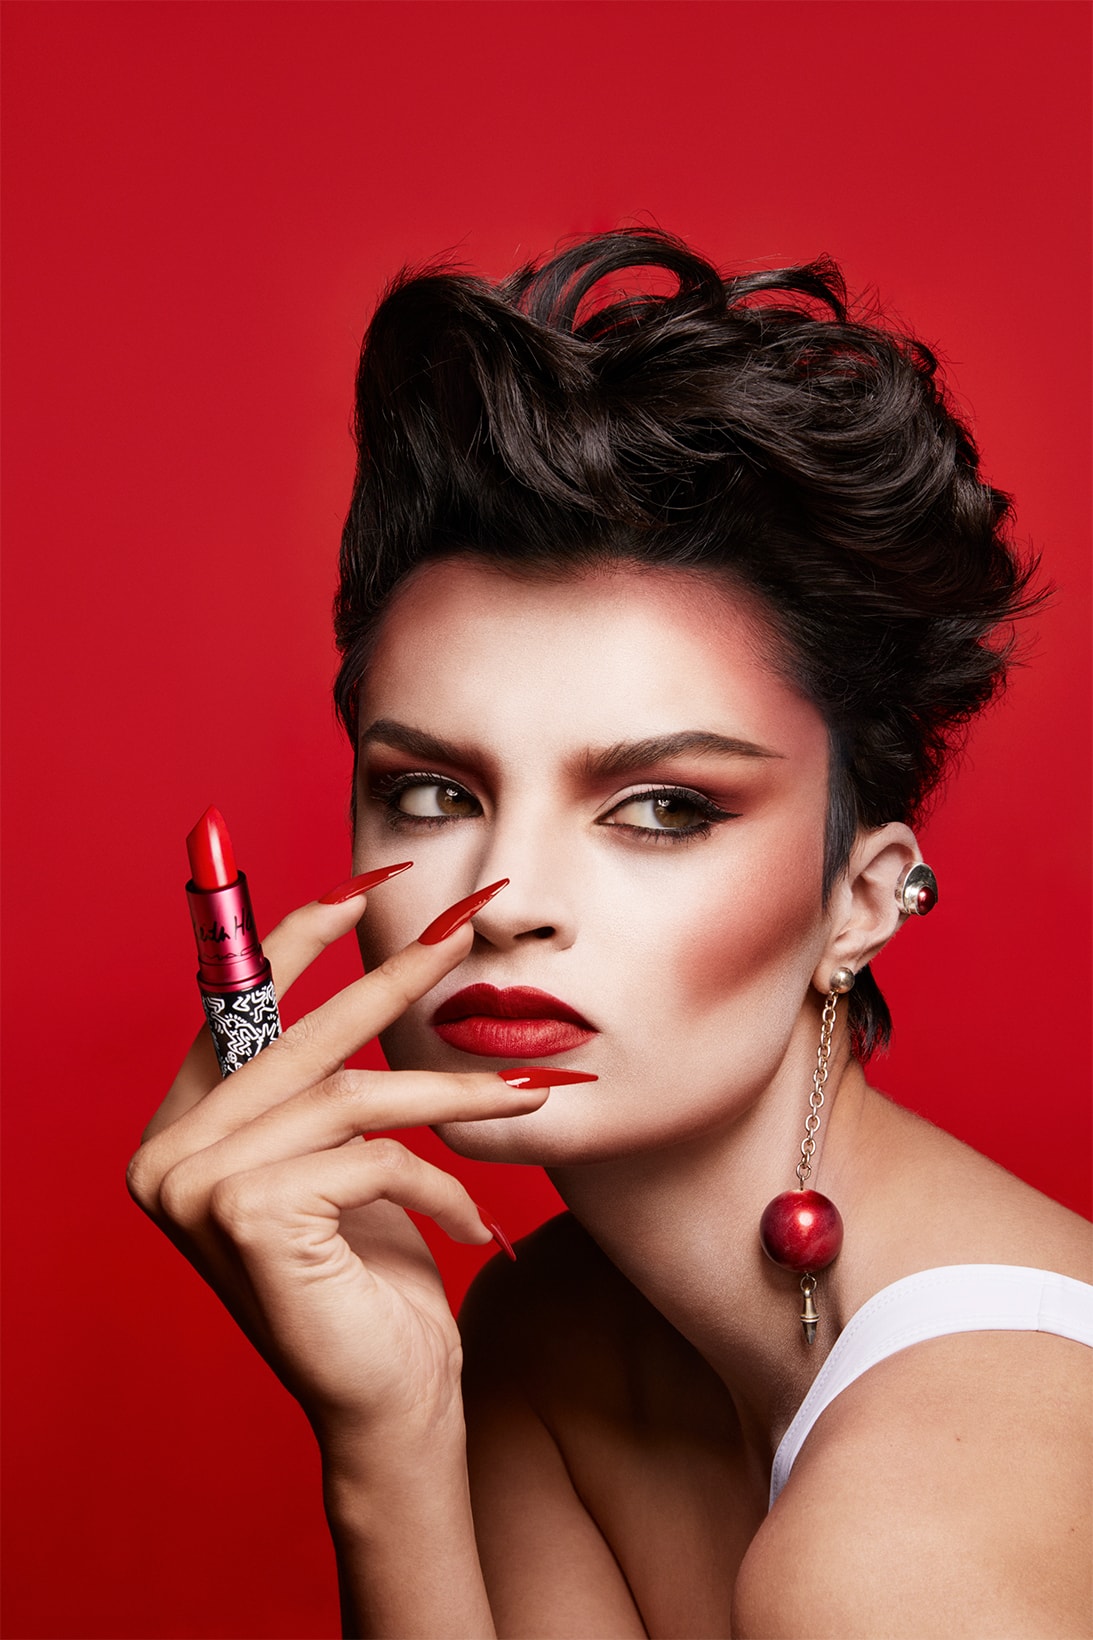 MAC Keith Hering VIVA GLAM Lipsticks Collection Campaign Collaboration Makeup Beauty red